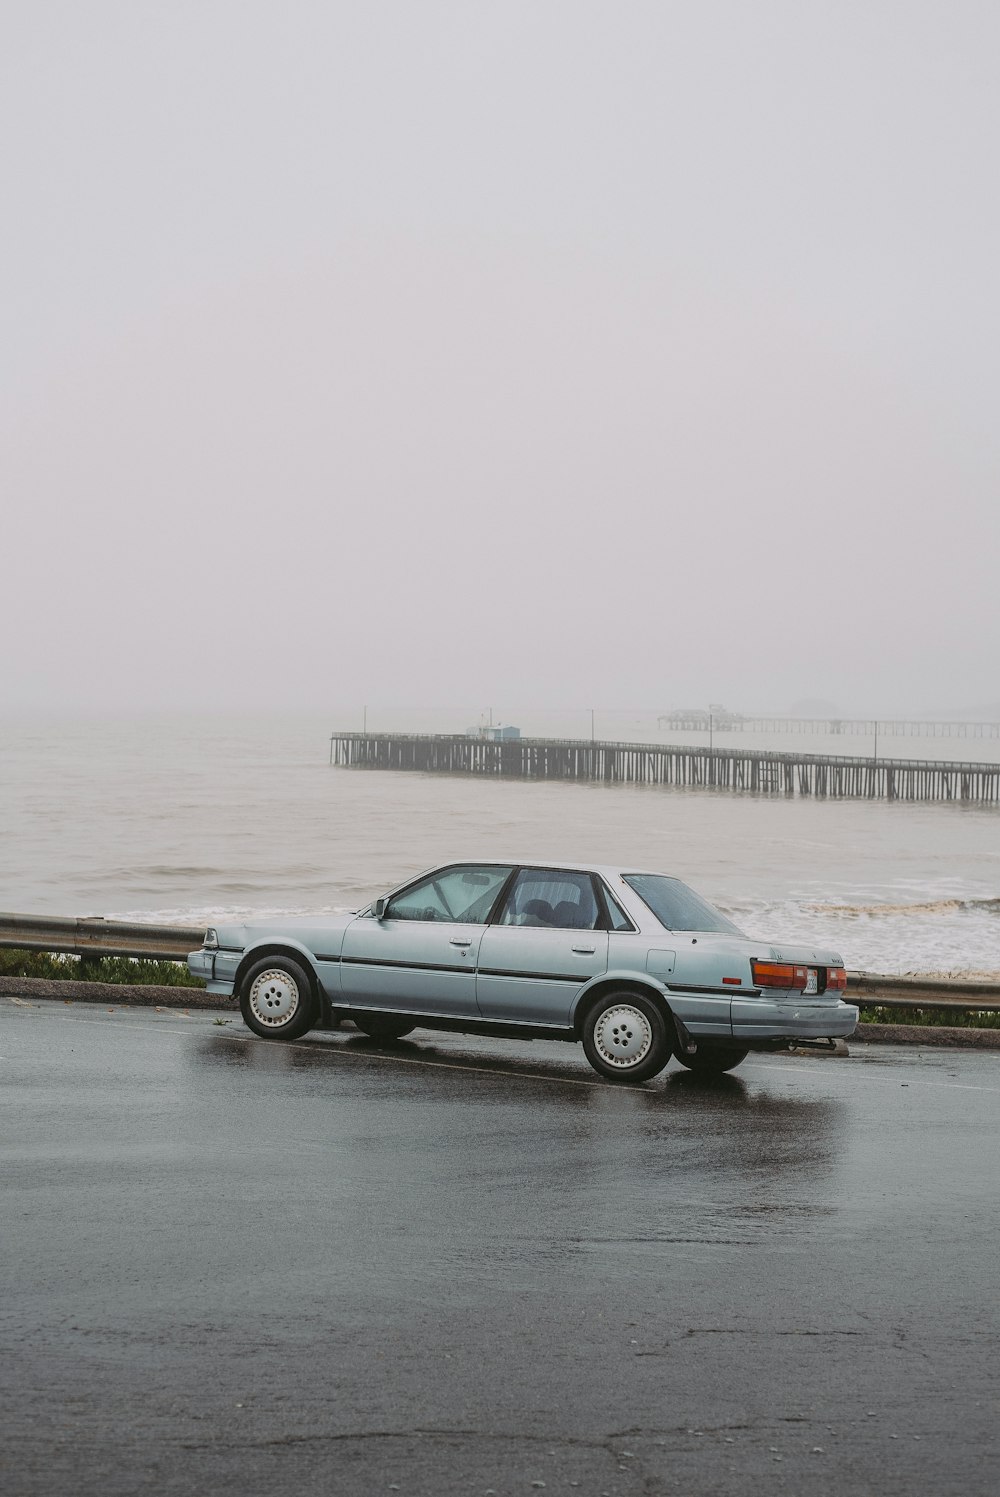 a car parked on the side of the road near the ocean